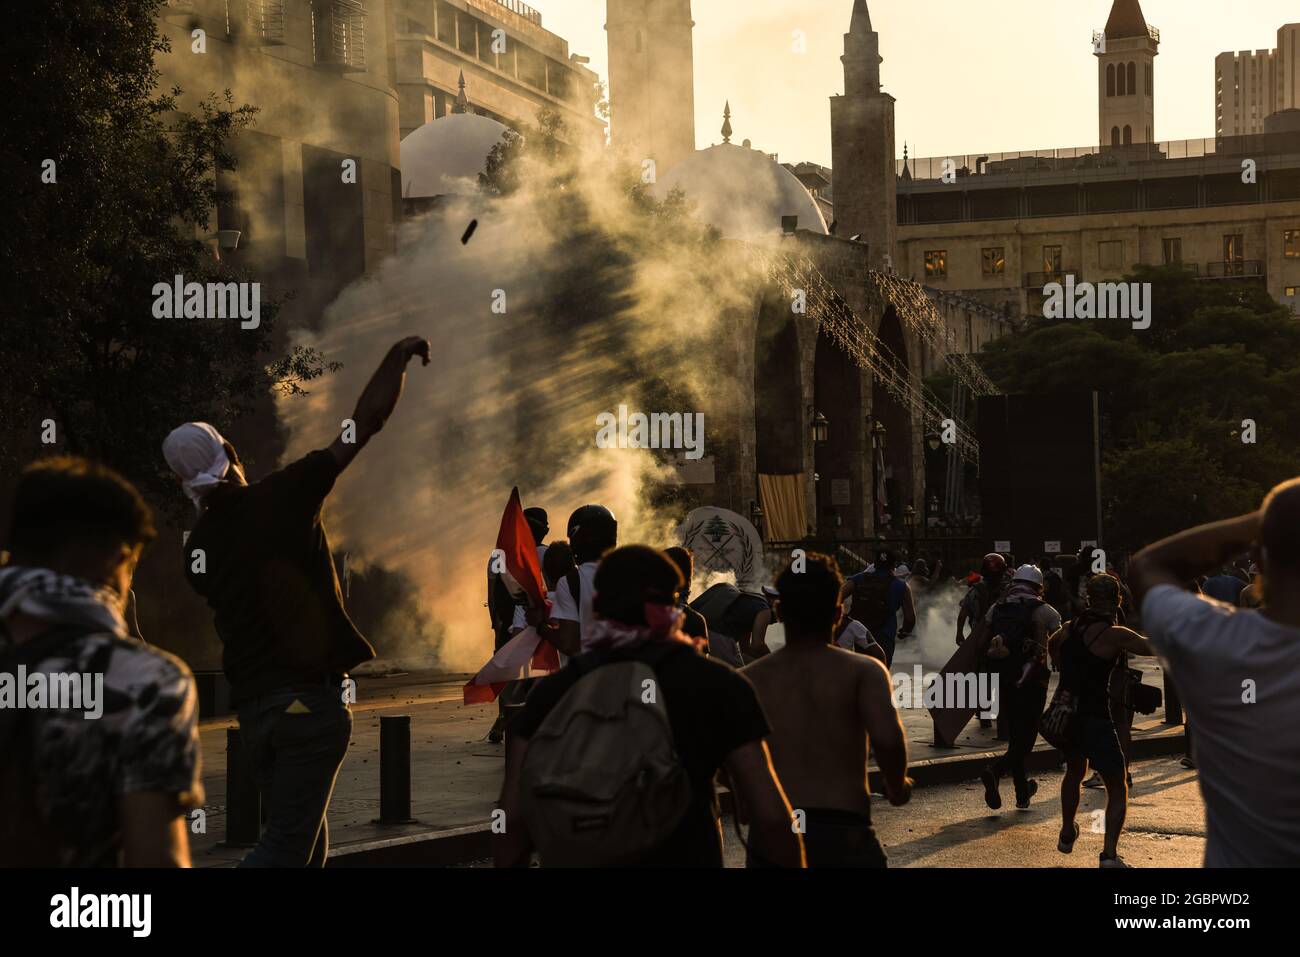 Beirut, Lebanon, 4 August 2021. People protesting failure to find those responsible for the Beirut Blast and hold them responsible throw stones at security forces deploying heavy tear gas. Stock Photo